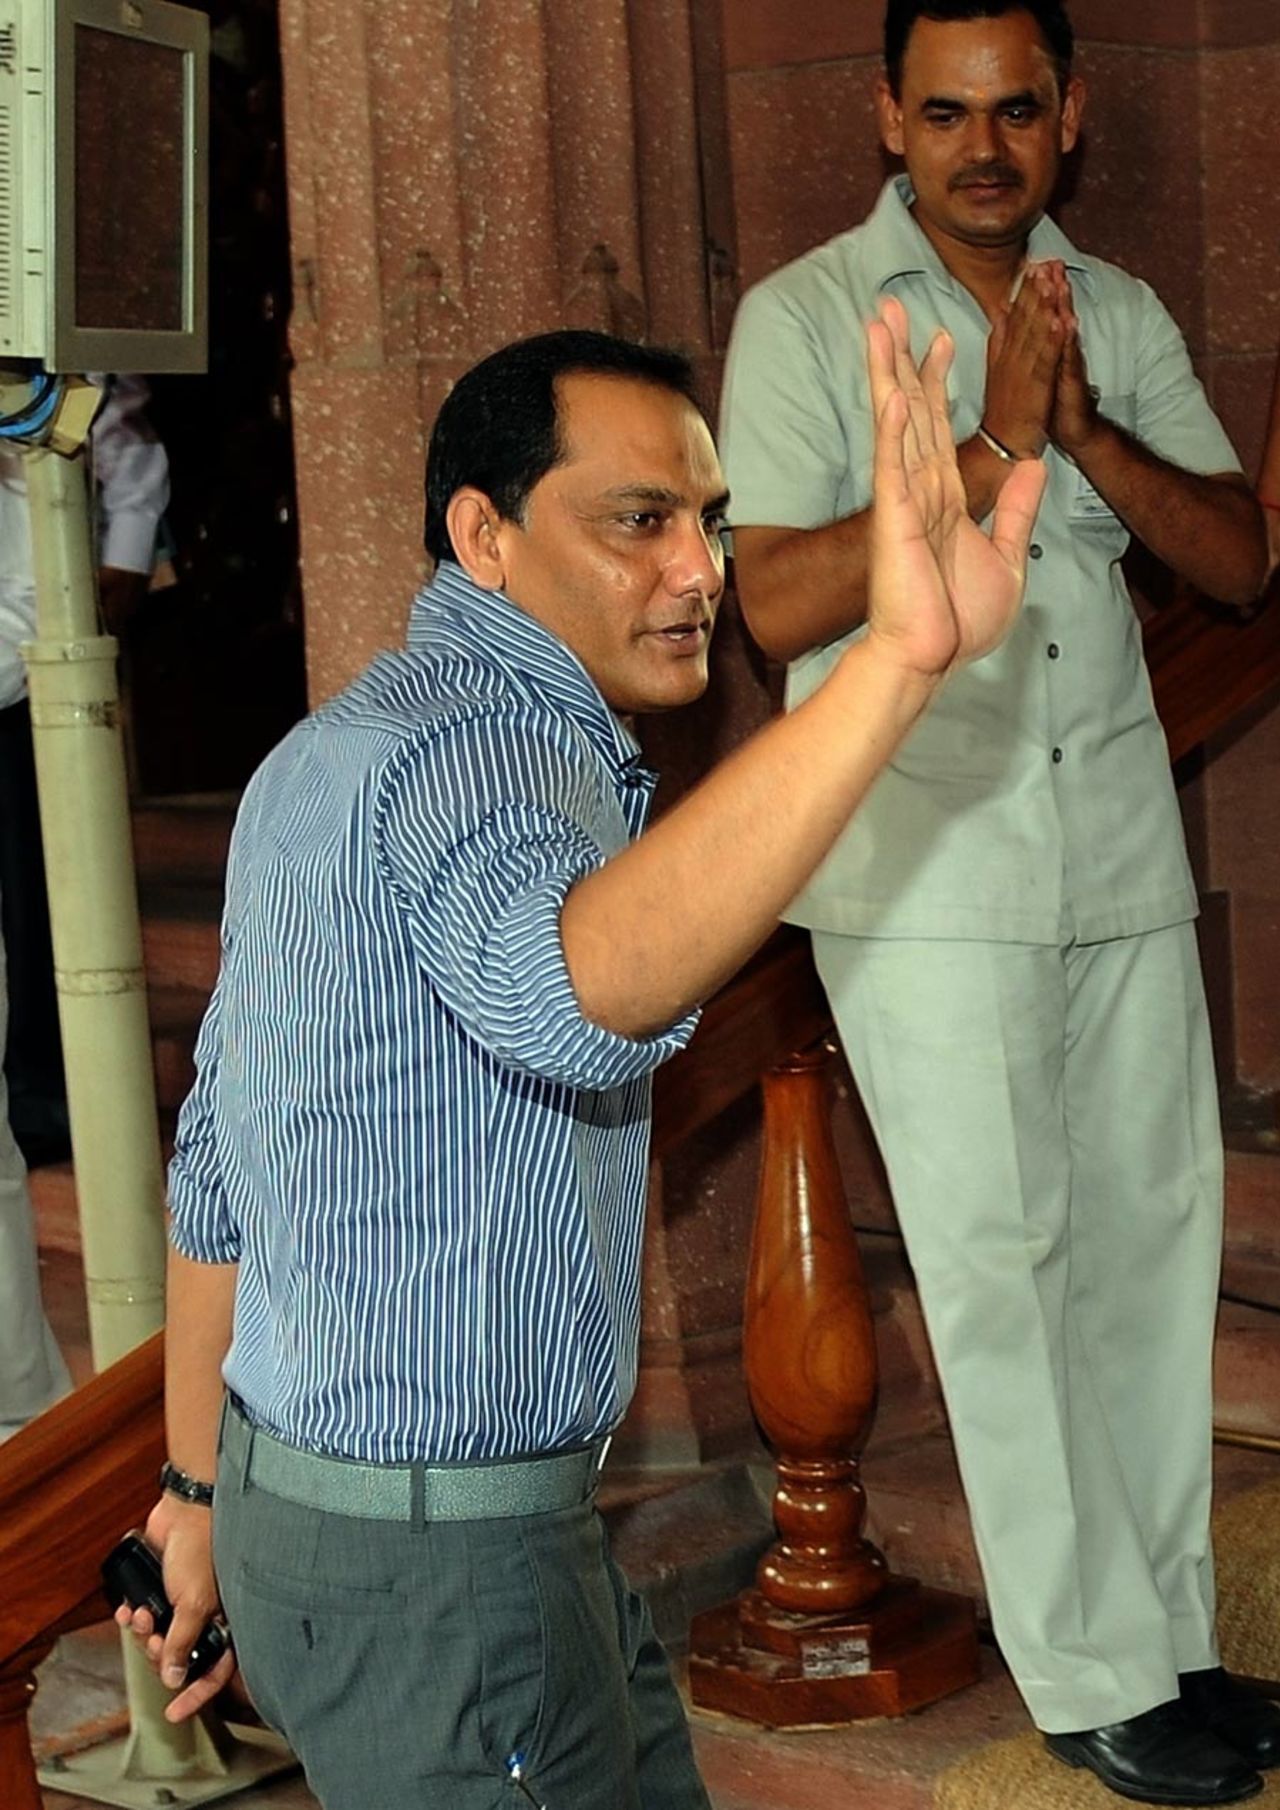 Former Indian captain and current MP Mohammad Azharuddin arrives for the monsoon session of the parliament, New Delhi, July 26, 2010